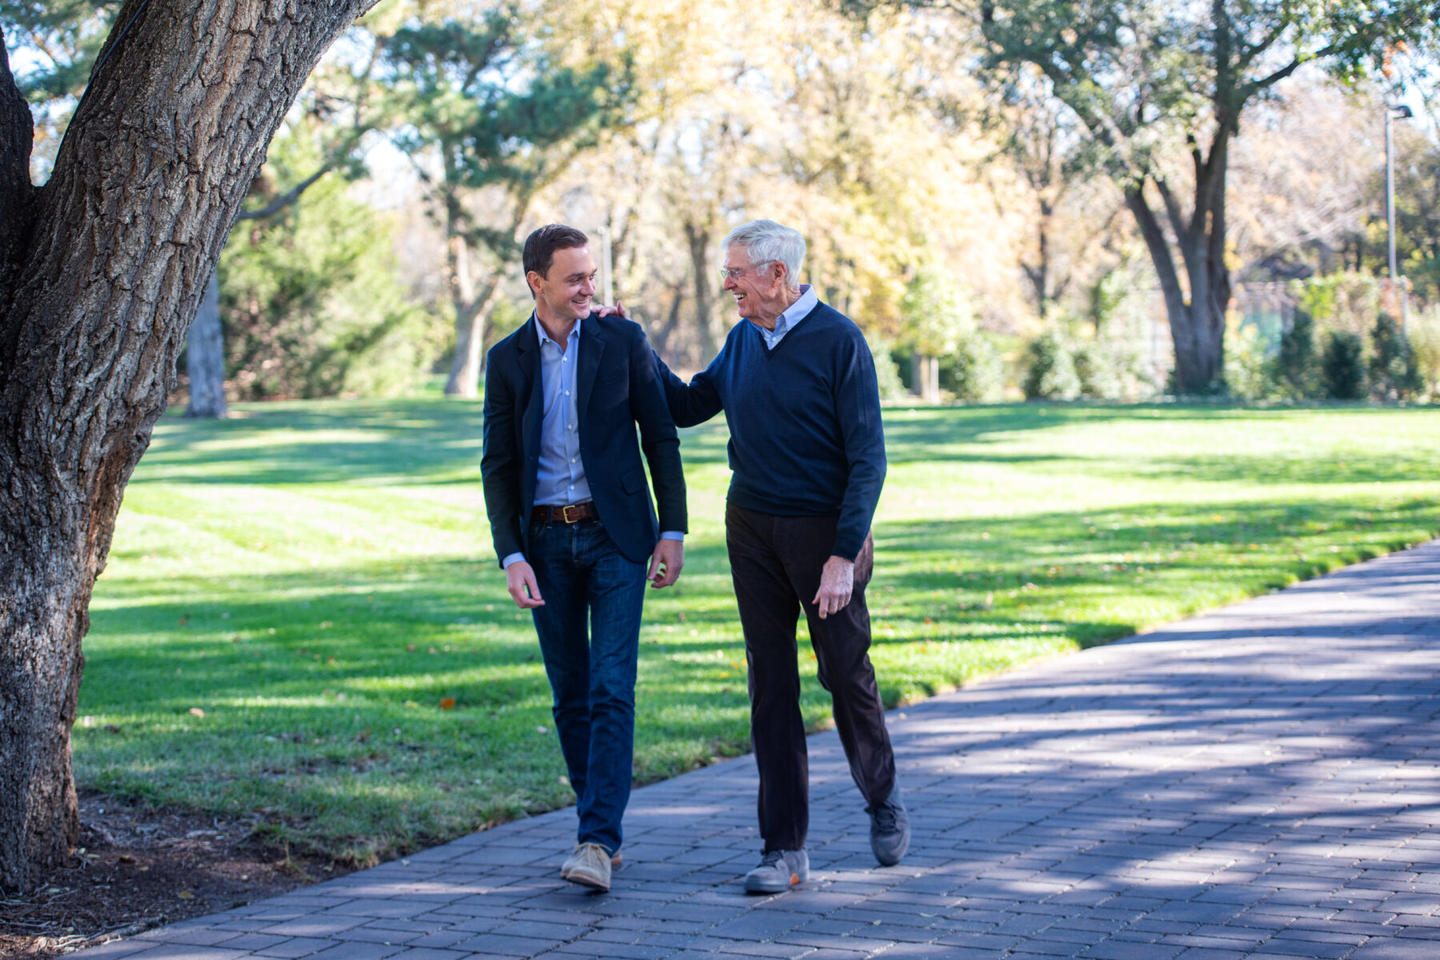 Charles Koch and Brian Hooks walking together